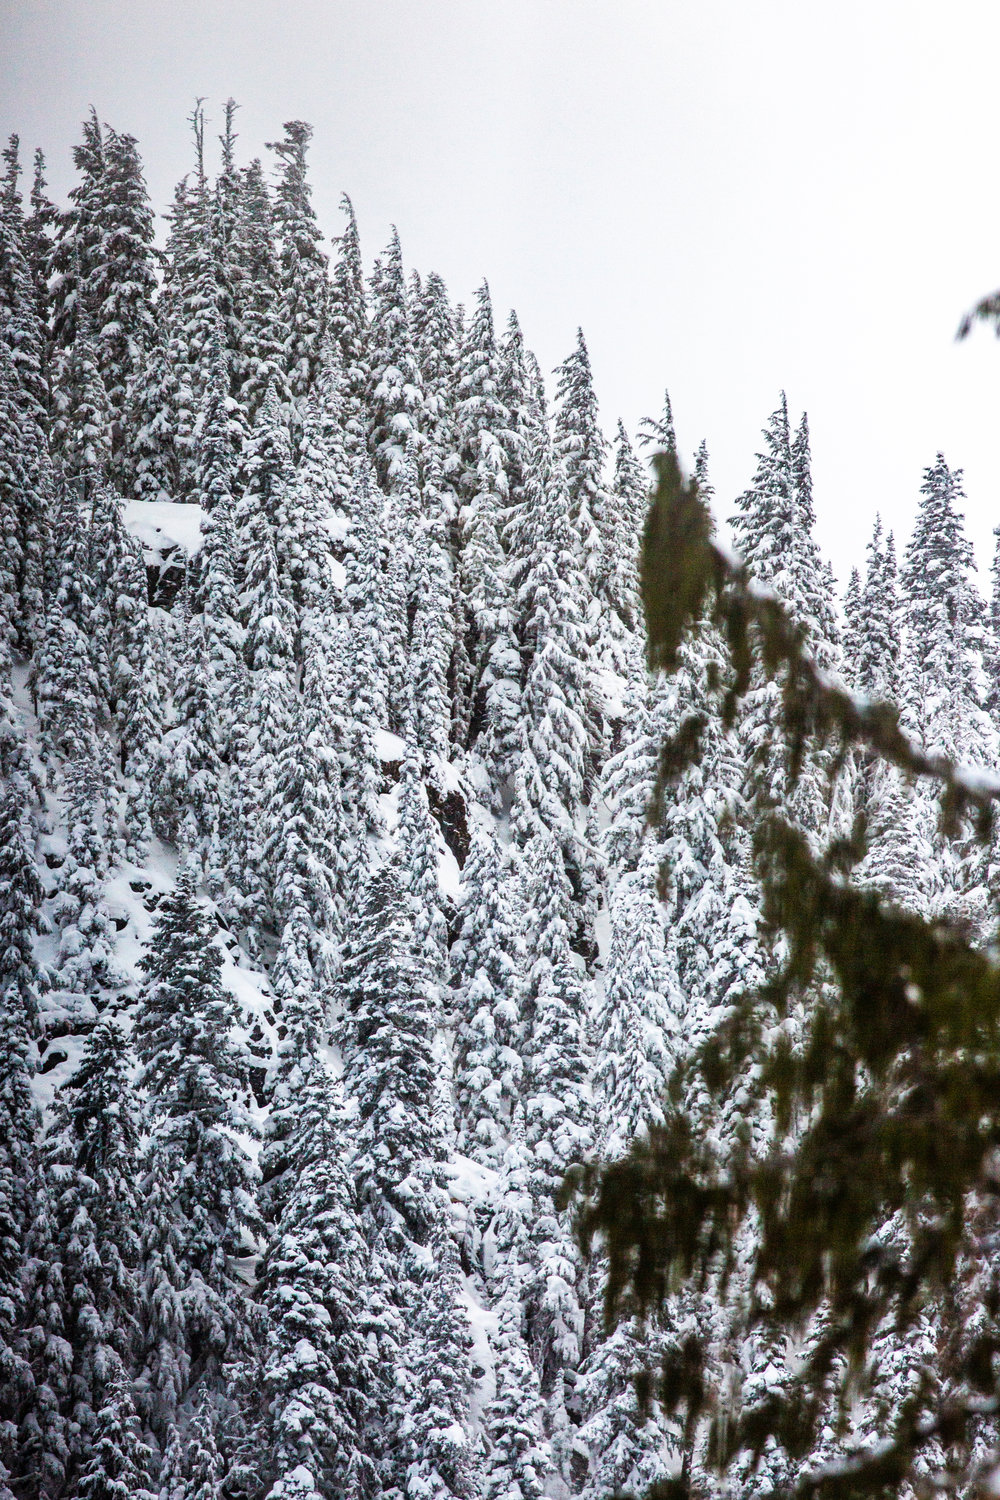 Snow covers trees at White Pass Ski Area on Tuesday afternoon.